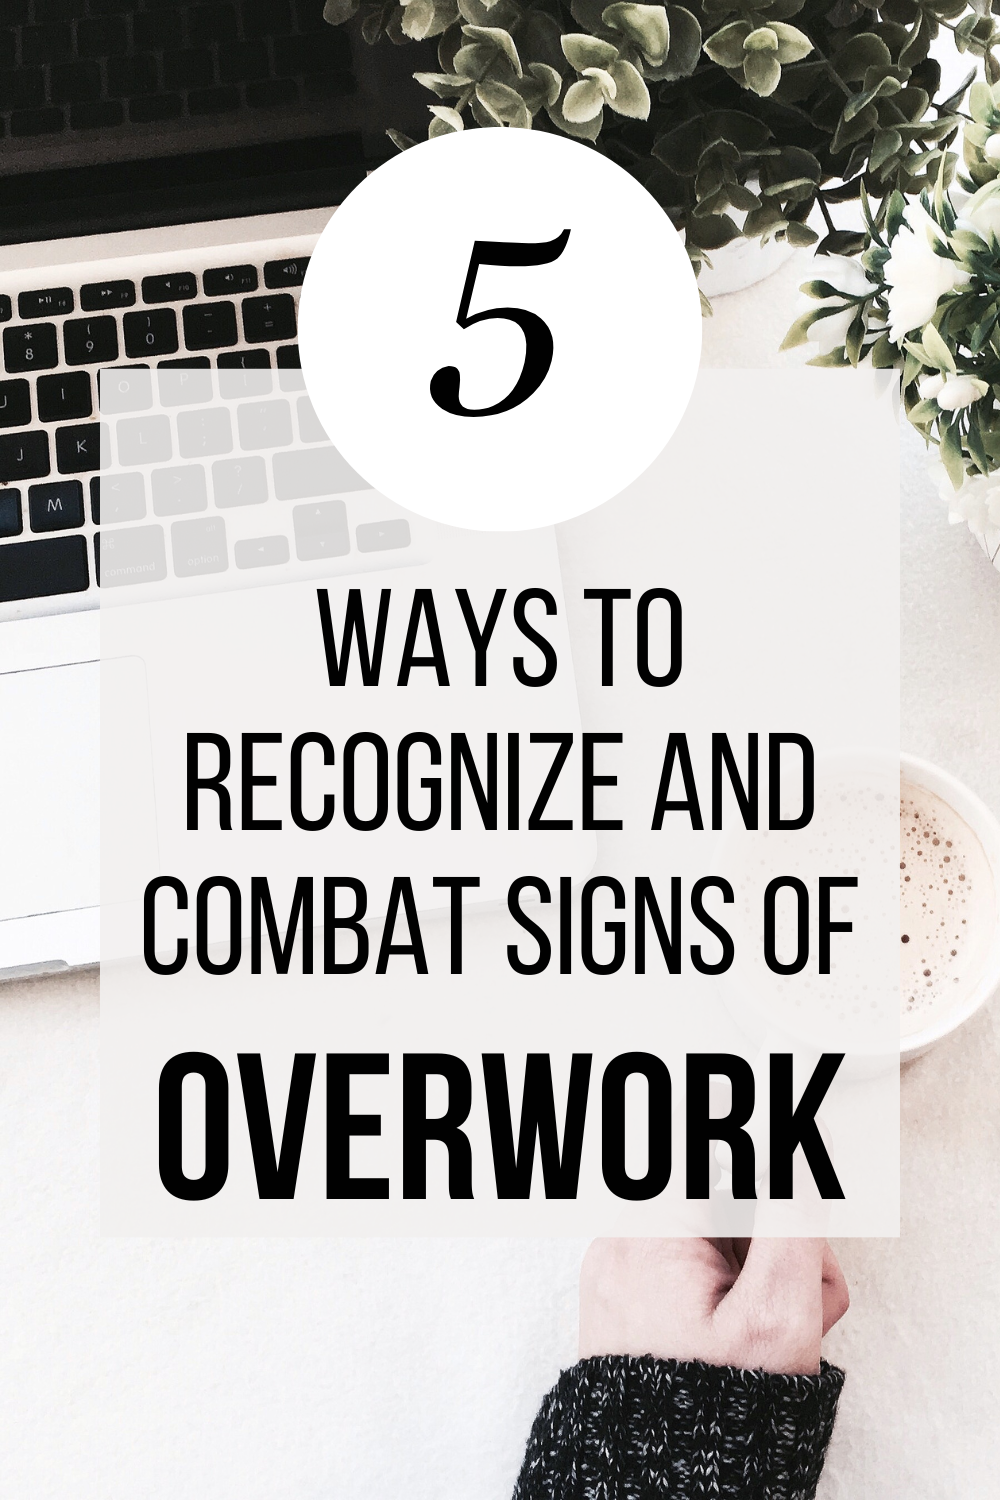 From Burnout to Balance: 5 Ways to Recognize and Combat the Signs of Overwork